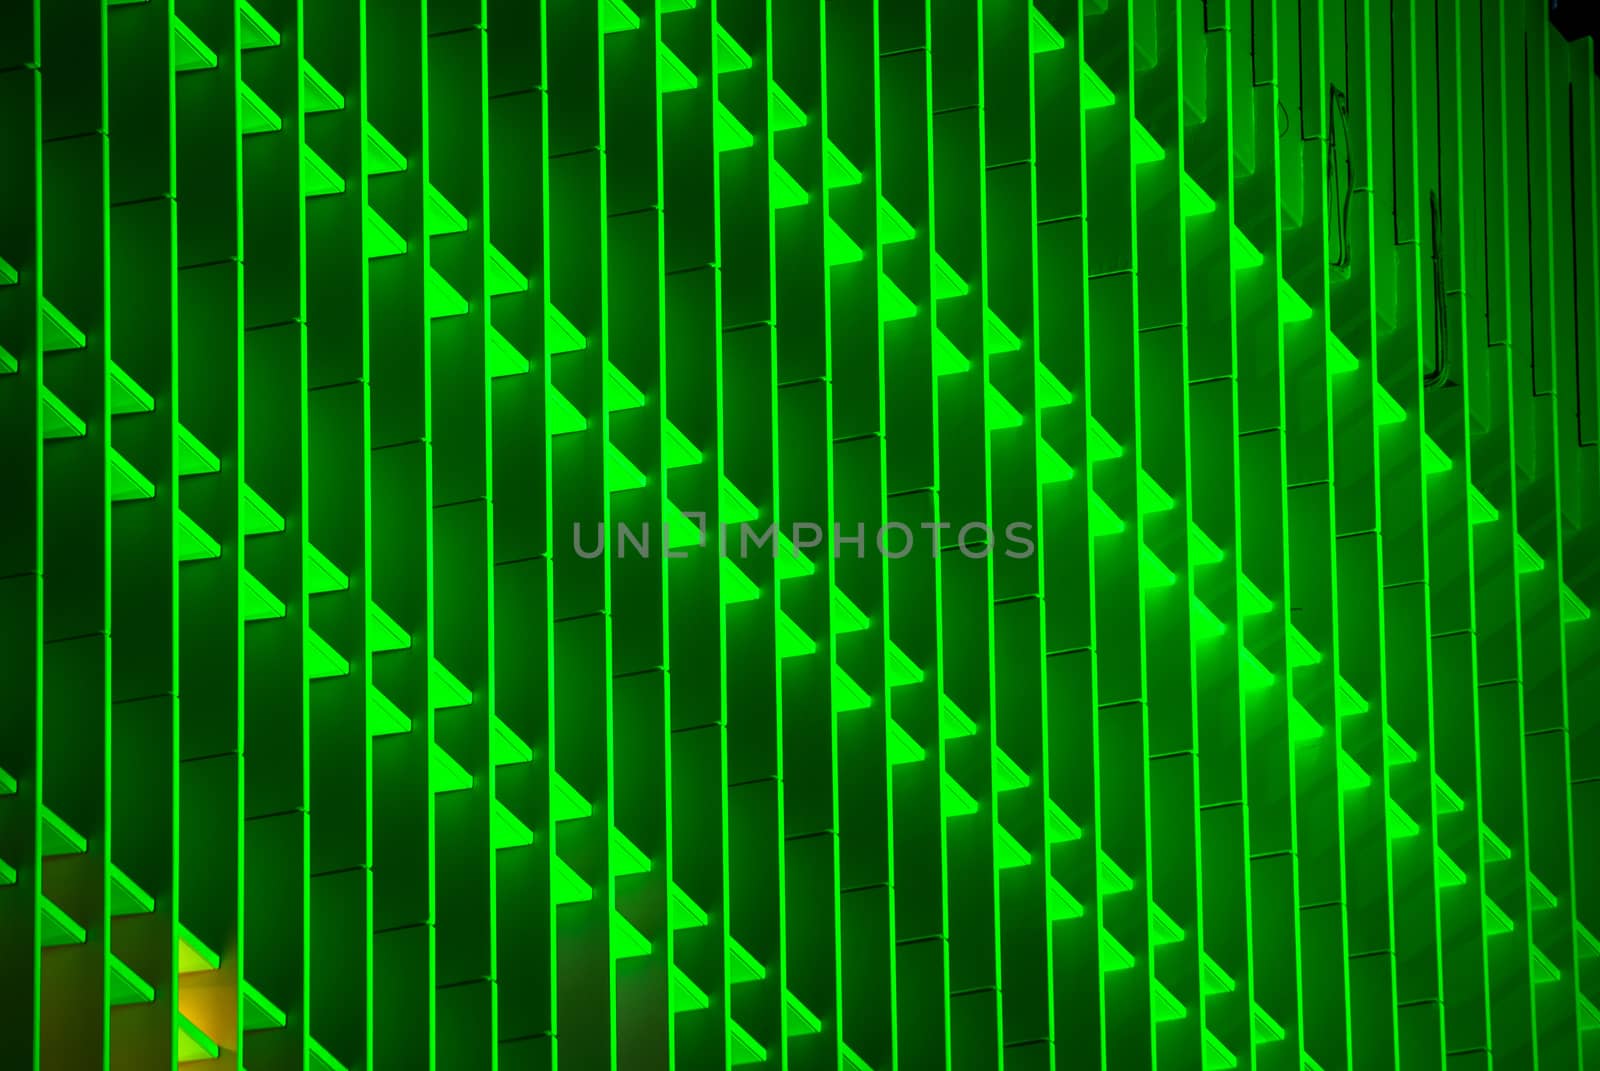 horizontal image of a Green building by merge